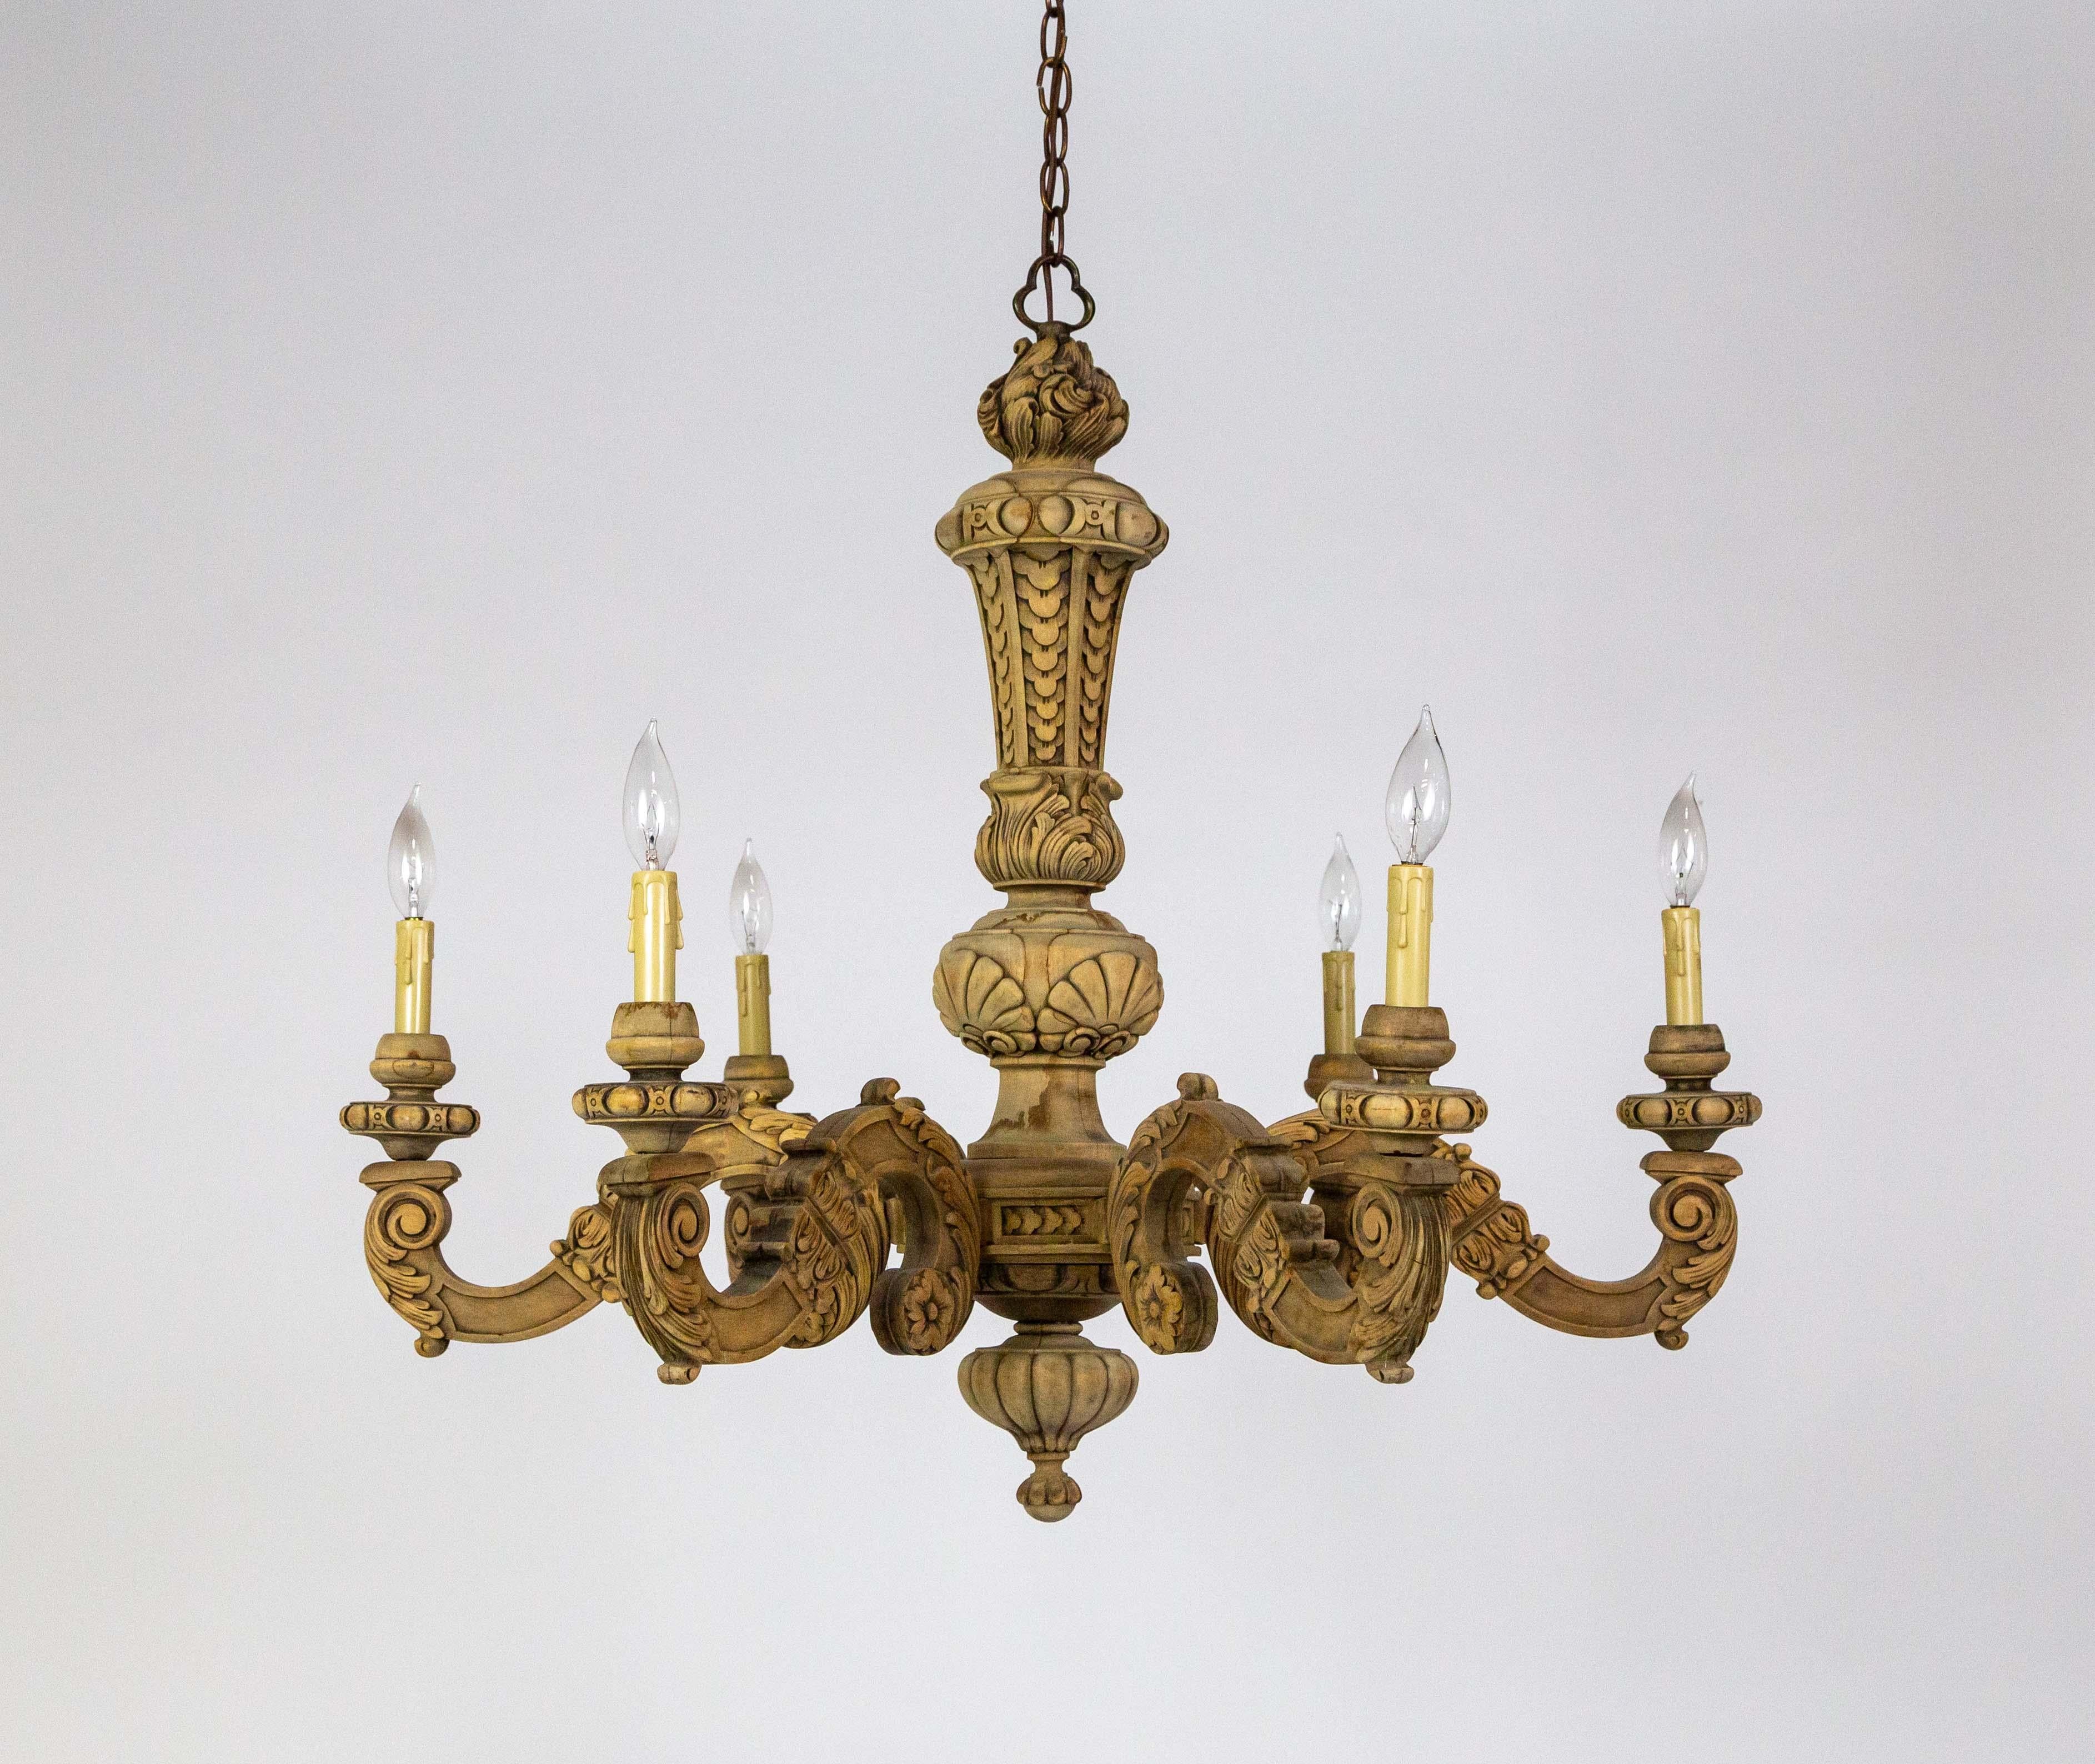 A raw wood chandelier with 6 S-curved, candlestick arms expertly carved with clean lines and structure. The motif includes egg-and-dart bobeches, acanthus leaves, florets, shells, and a gadrooned bottom finial. Circa 1920.  Newly rewired with a 48